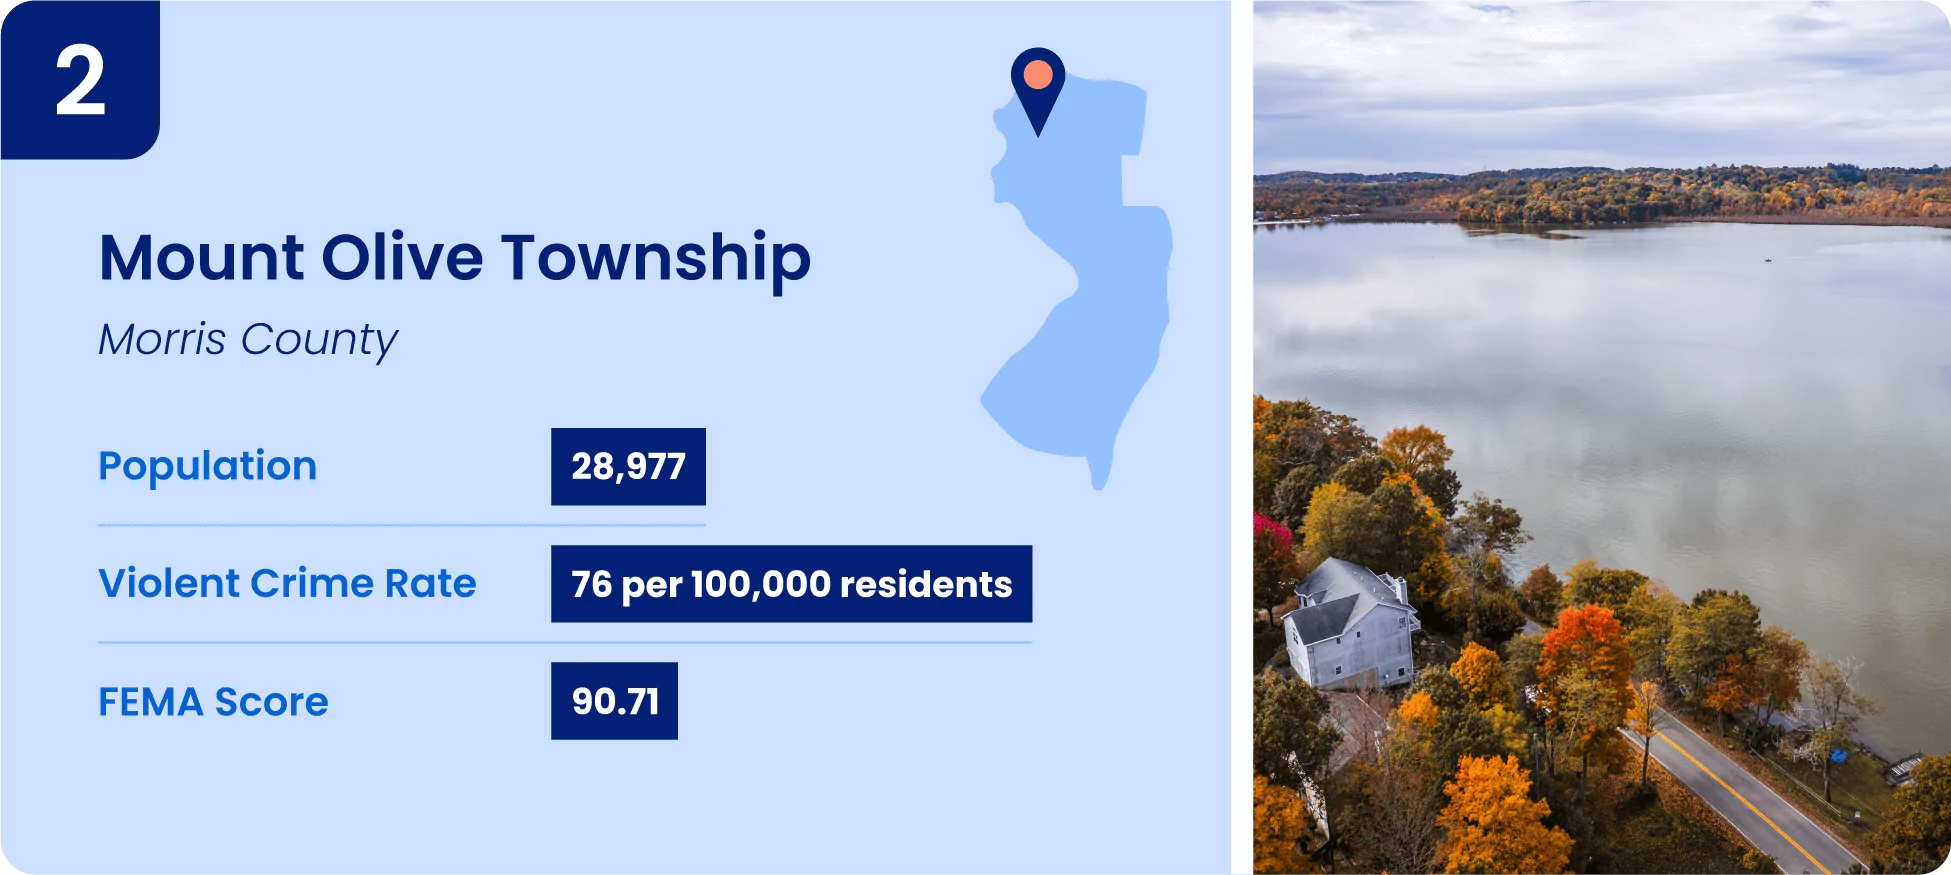 Image shows key information for one of the safest cities in New Jersey, Mount Olive Township.